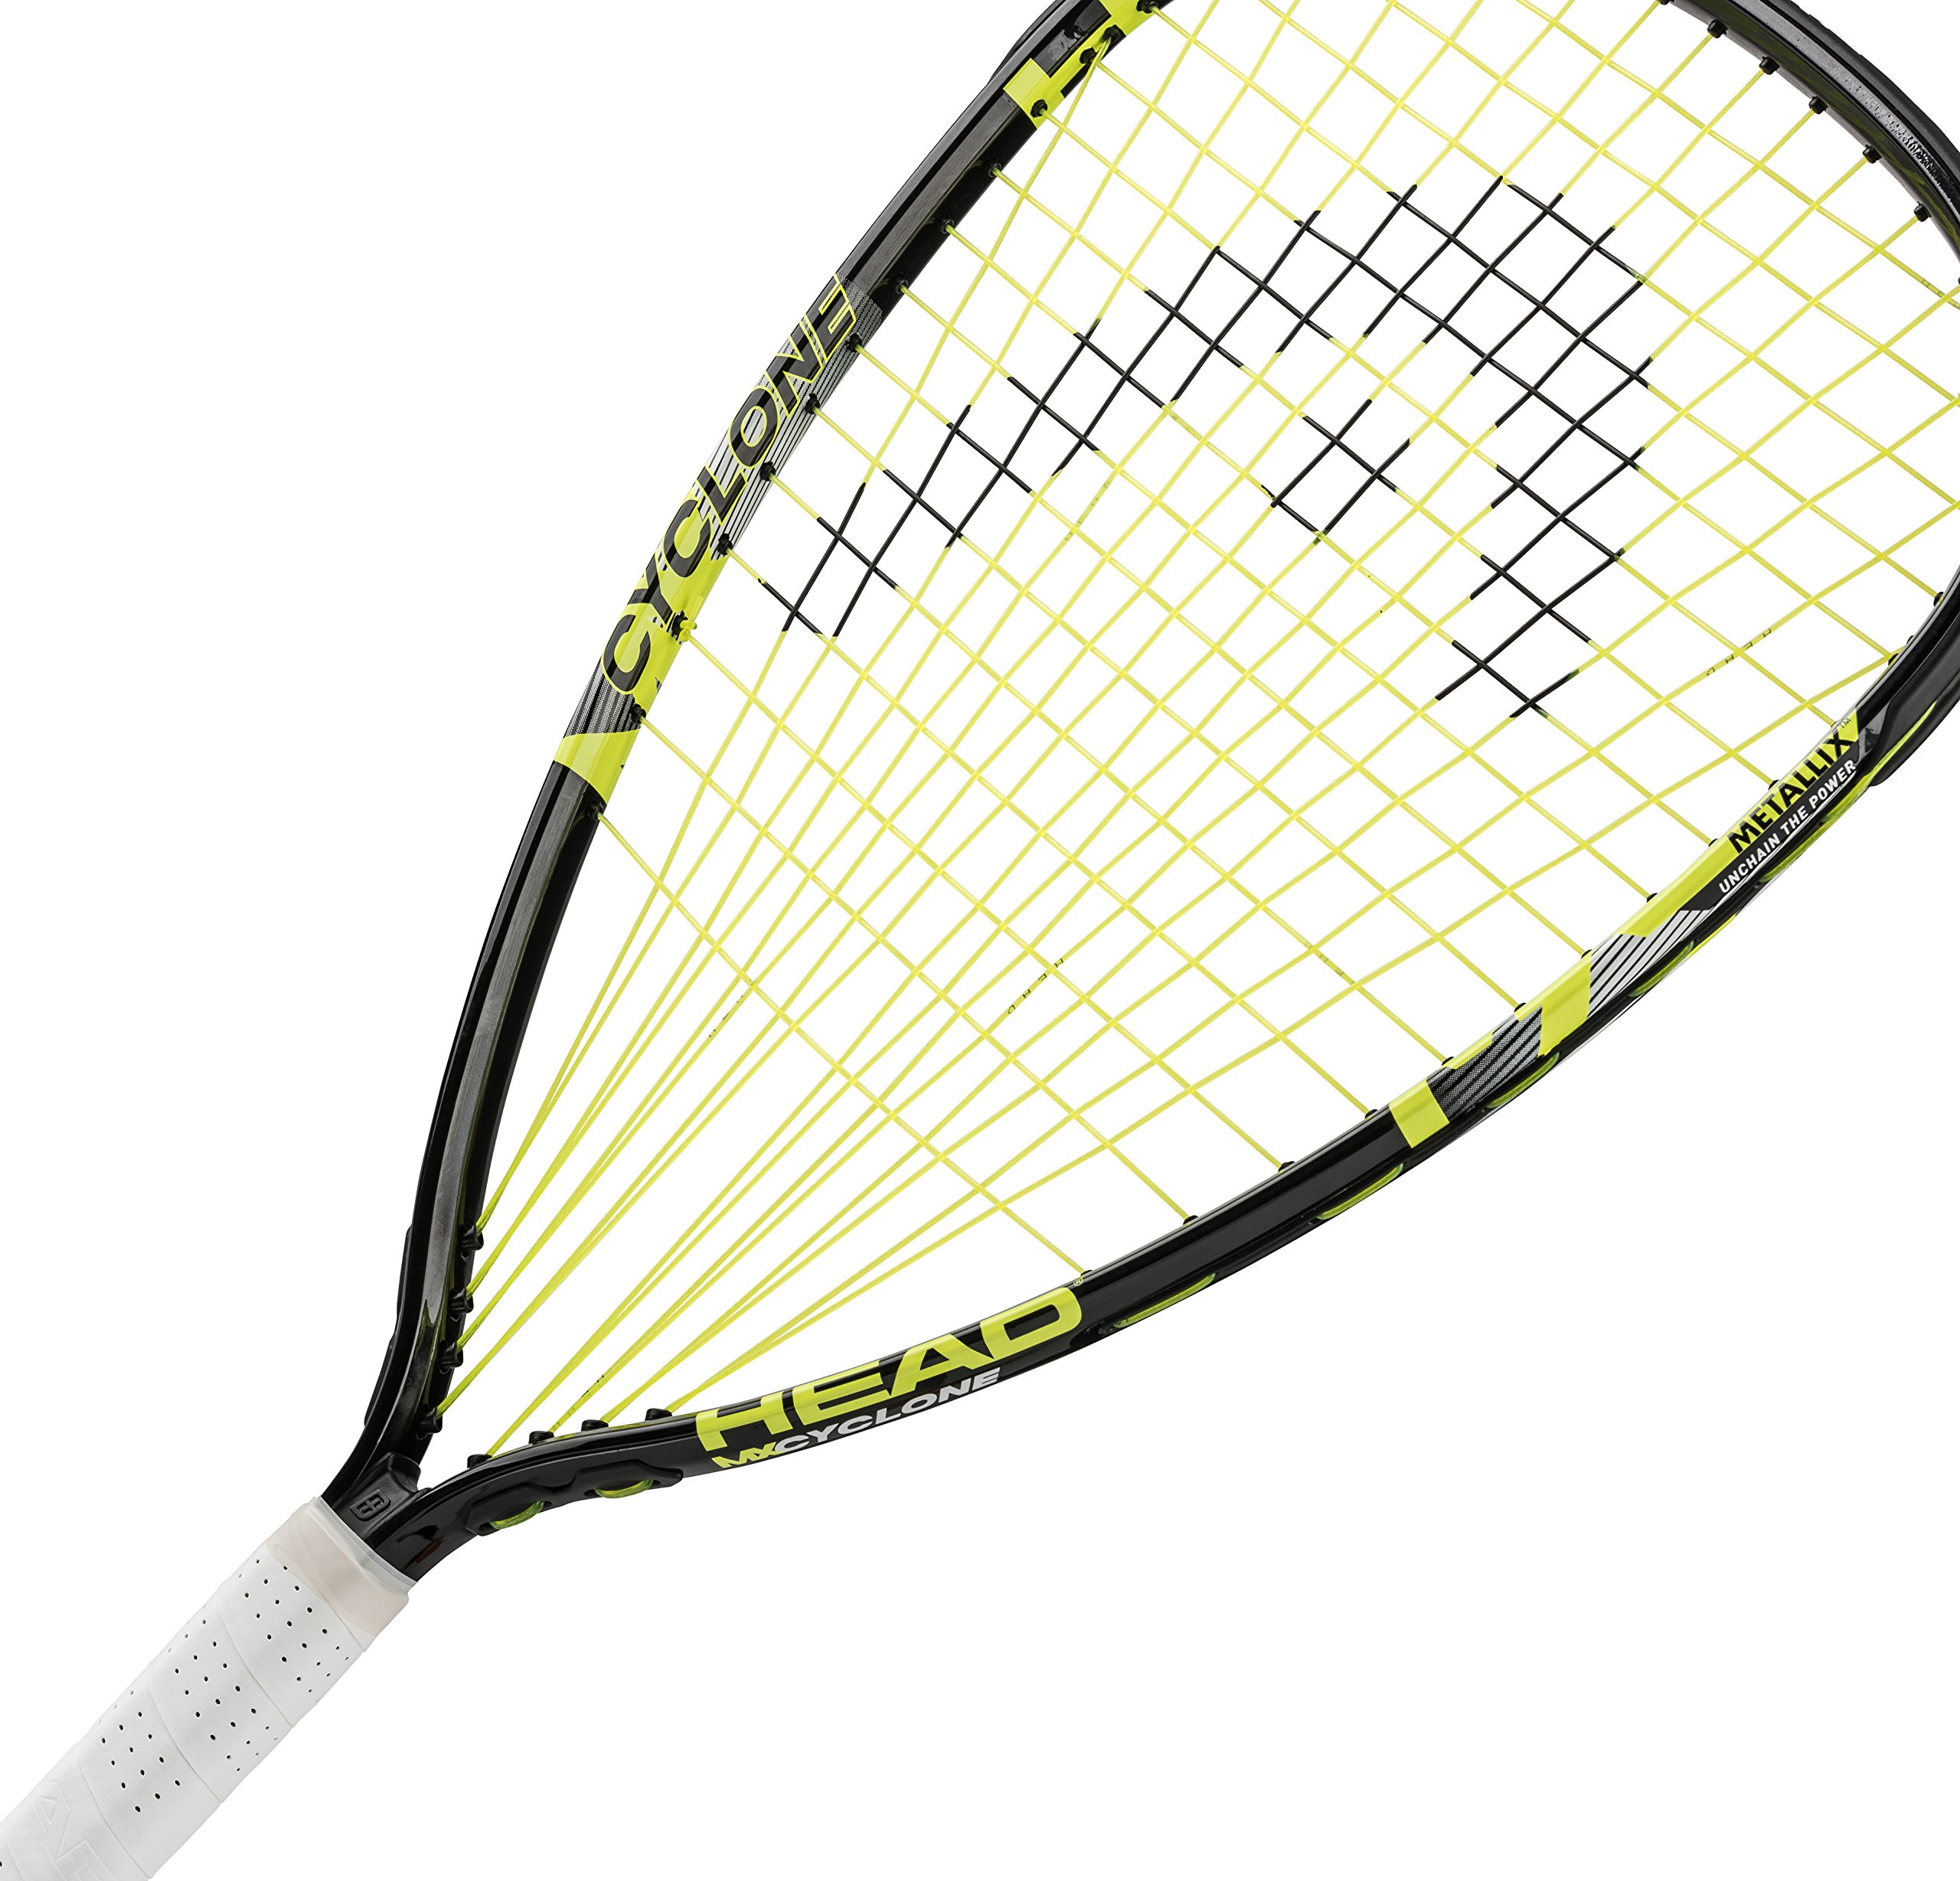 HEAD MX Cyclone Racquetball Racquet, 107 sq. in. Head Size, Black/Yellow, 6.5 Ounces - image 2 of 2